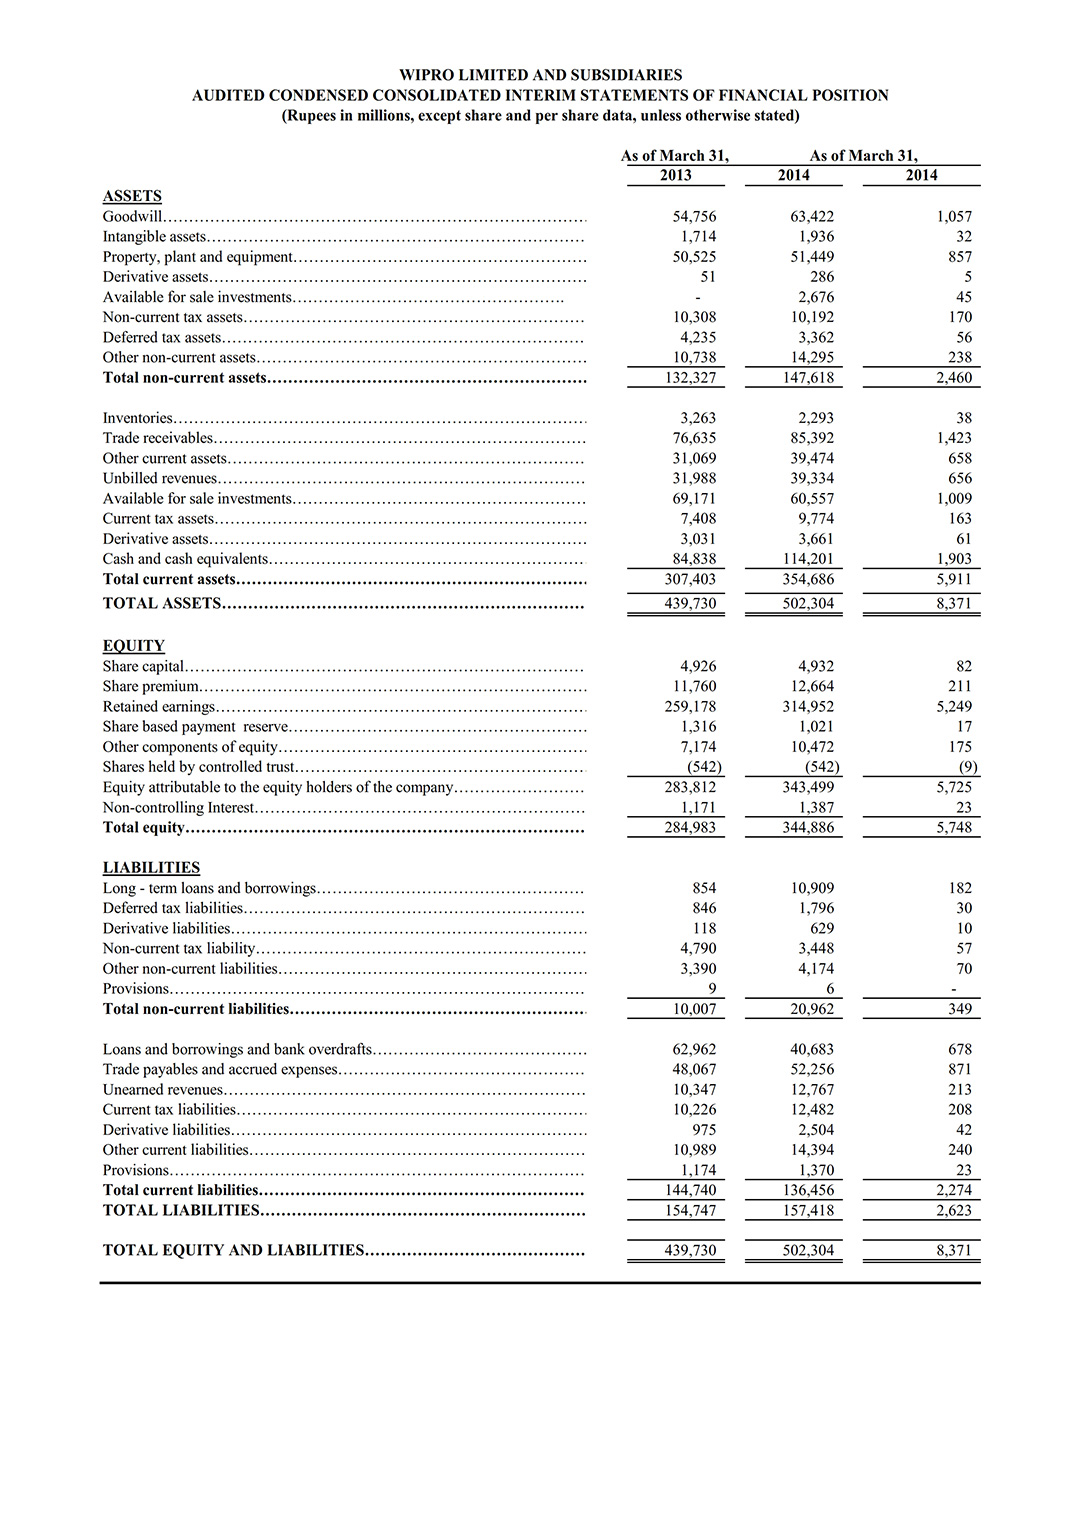 Results for the quarter and year ended March 31, 2014 under IFRS 